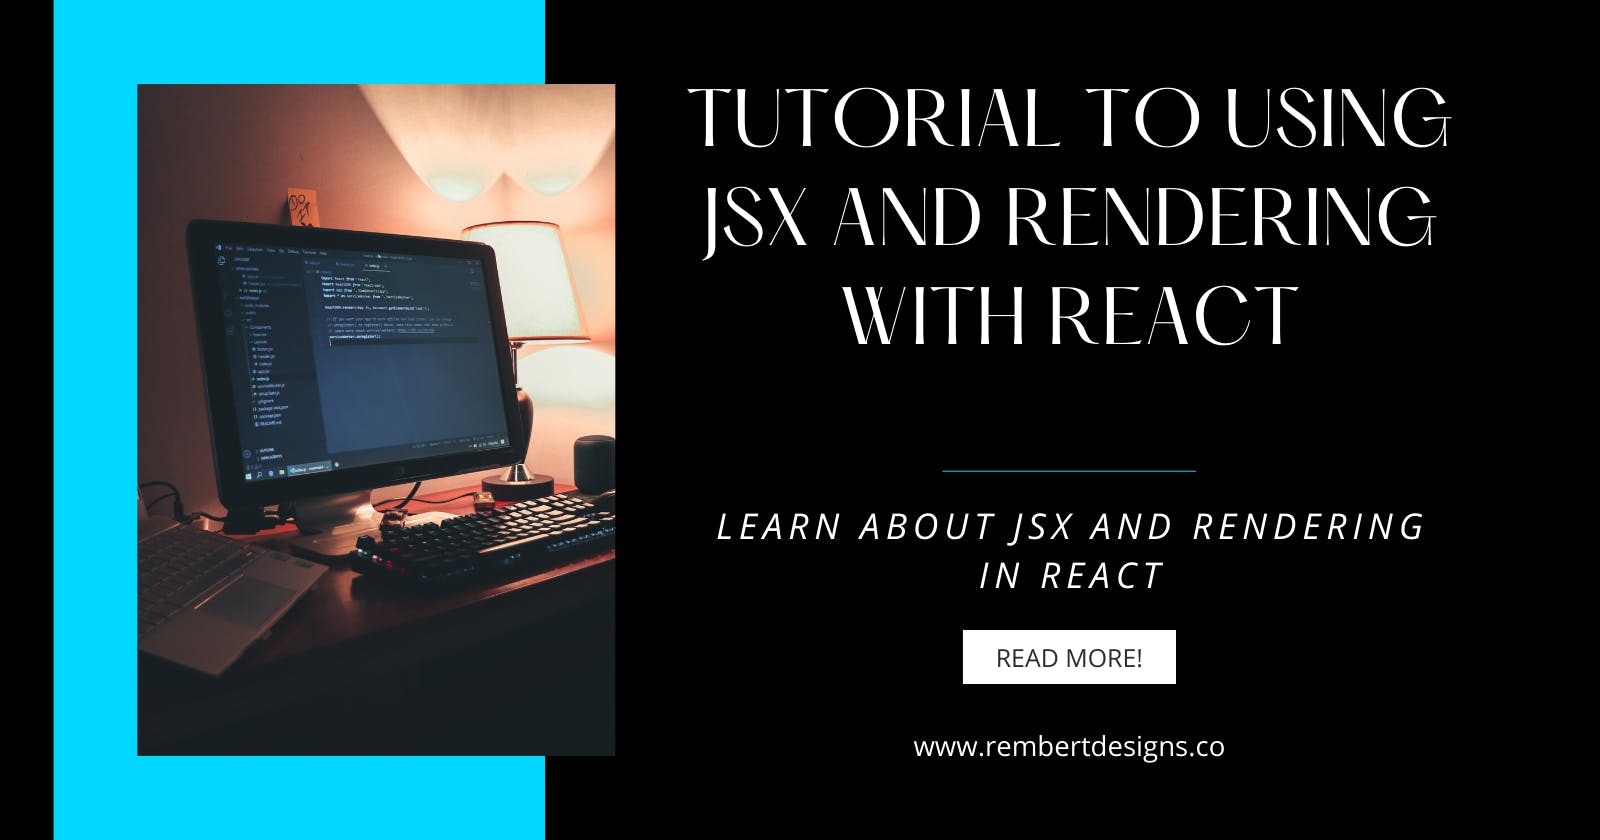 Tutorial to Using JSX and Rendering with React